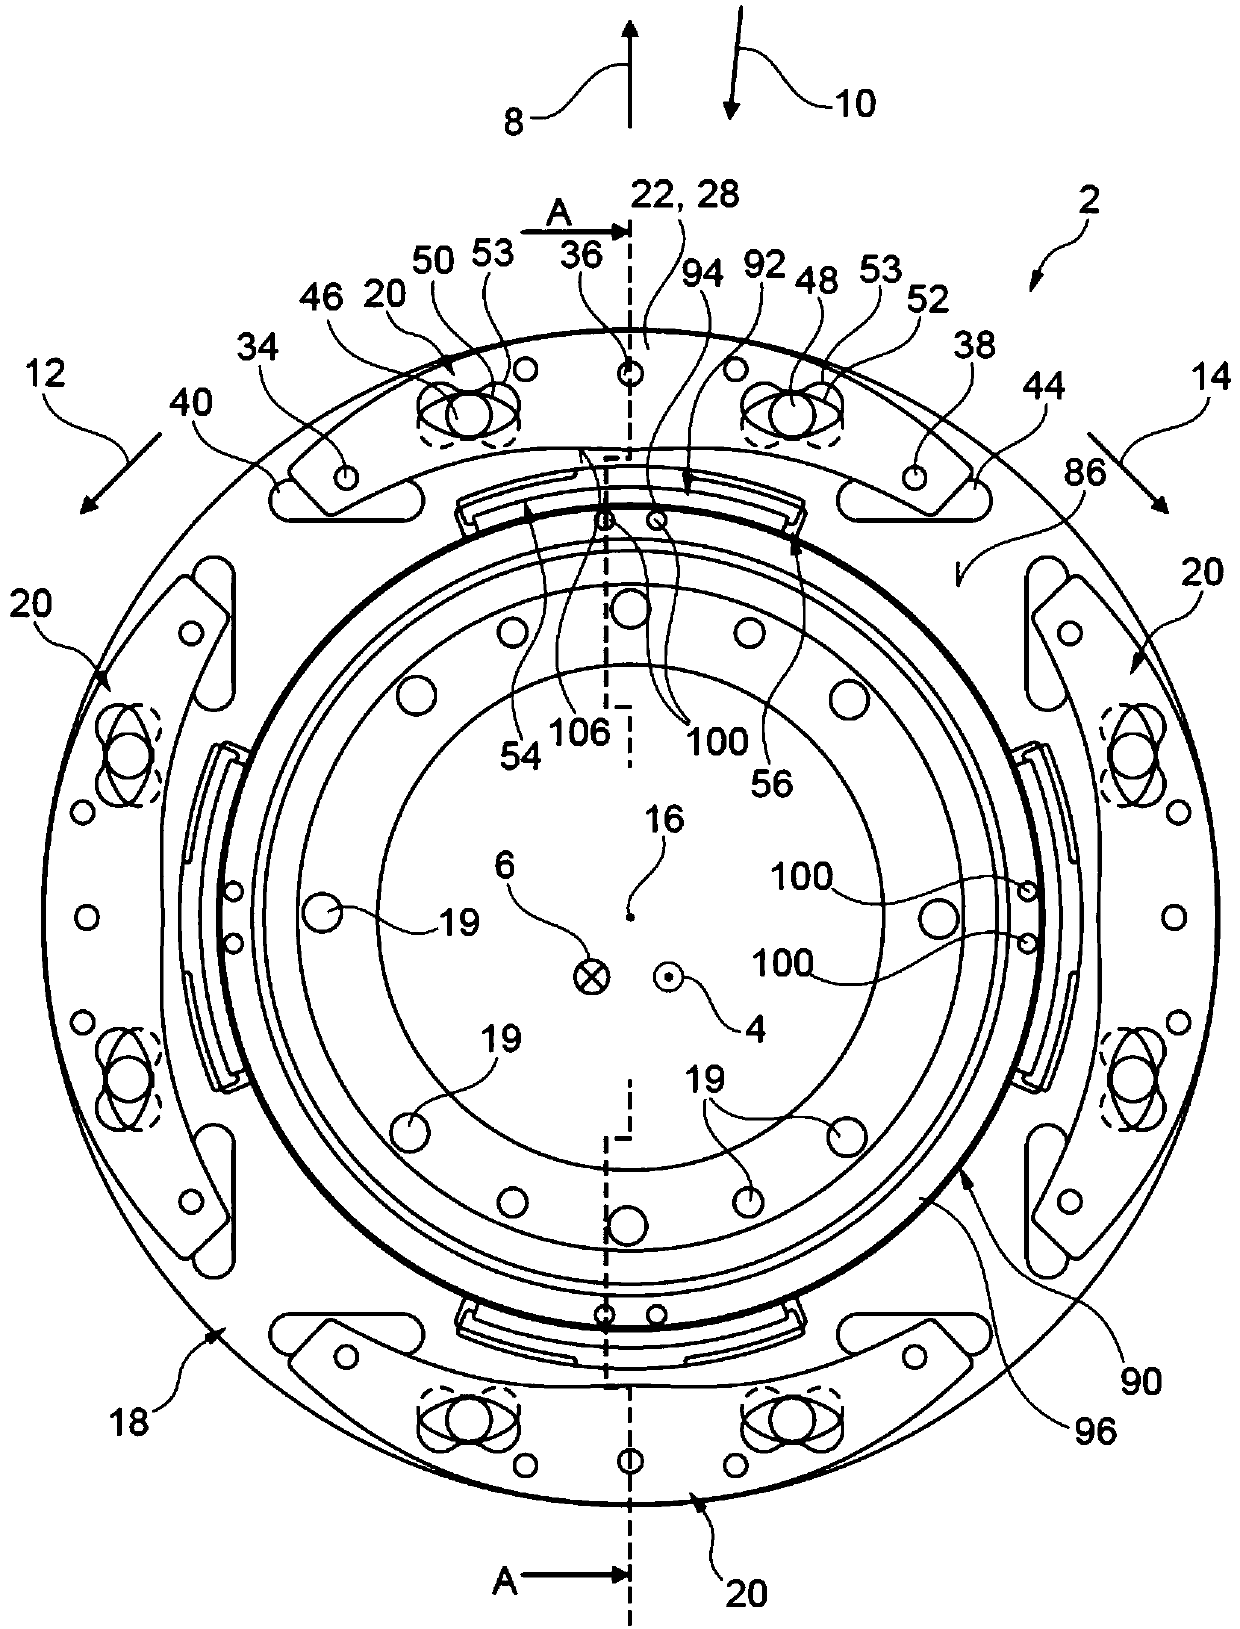 Centrifugal pendulum device and torsion damper with the same